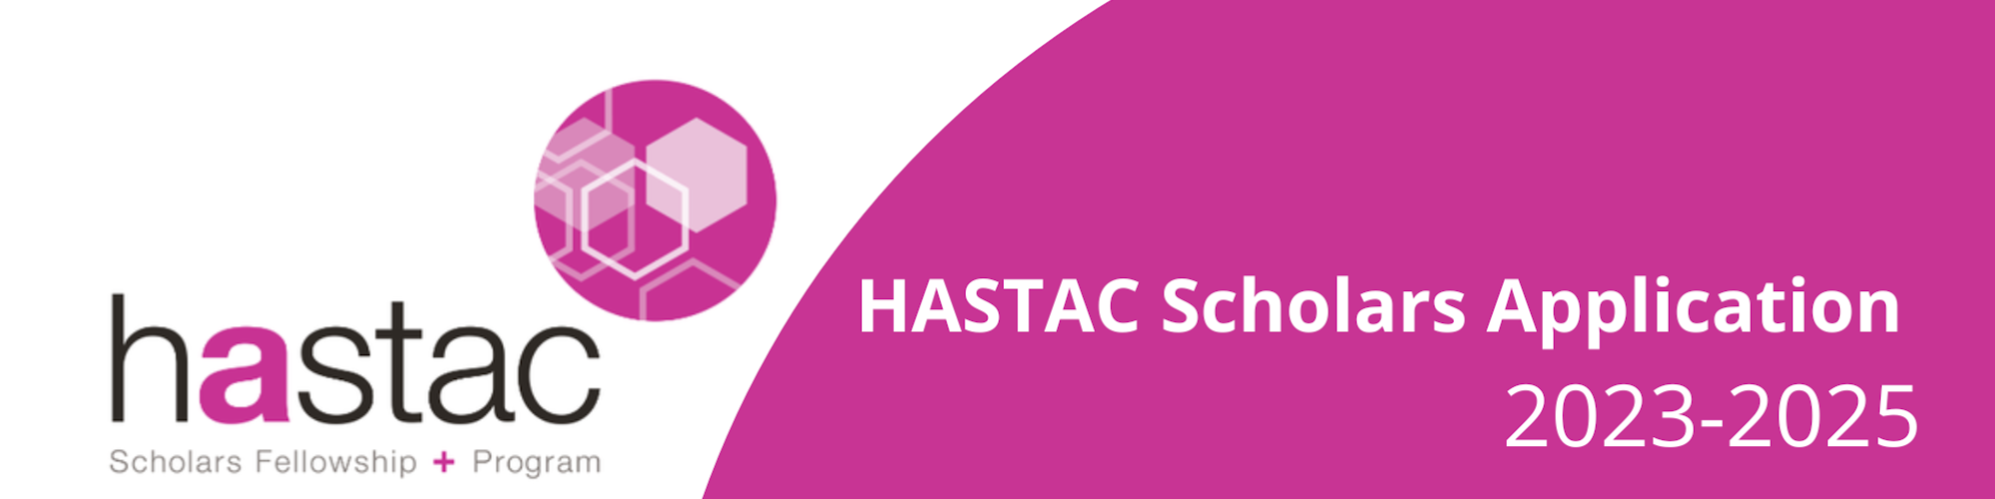 pink and white graphic that reads:
hastac
Scholars Fellowship + Program
HASTAC Scholars Application
2023-2025